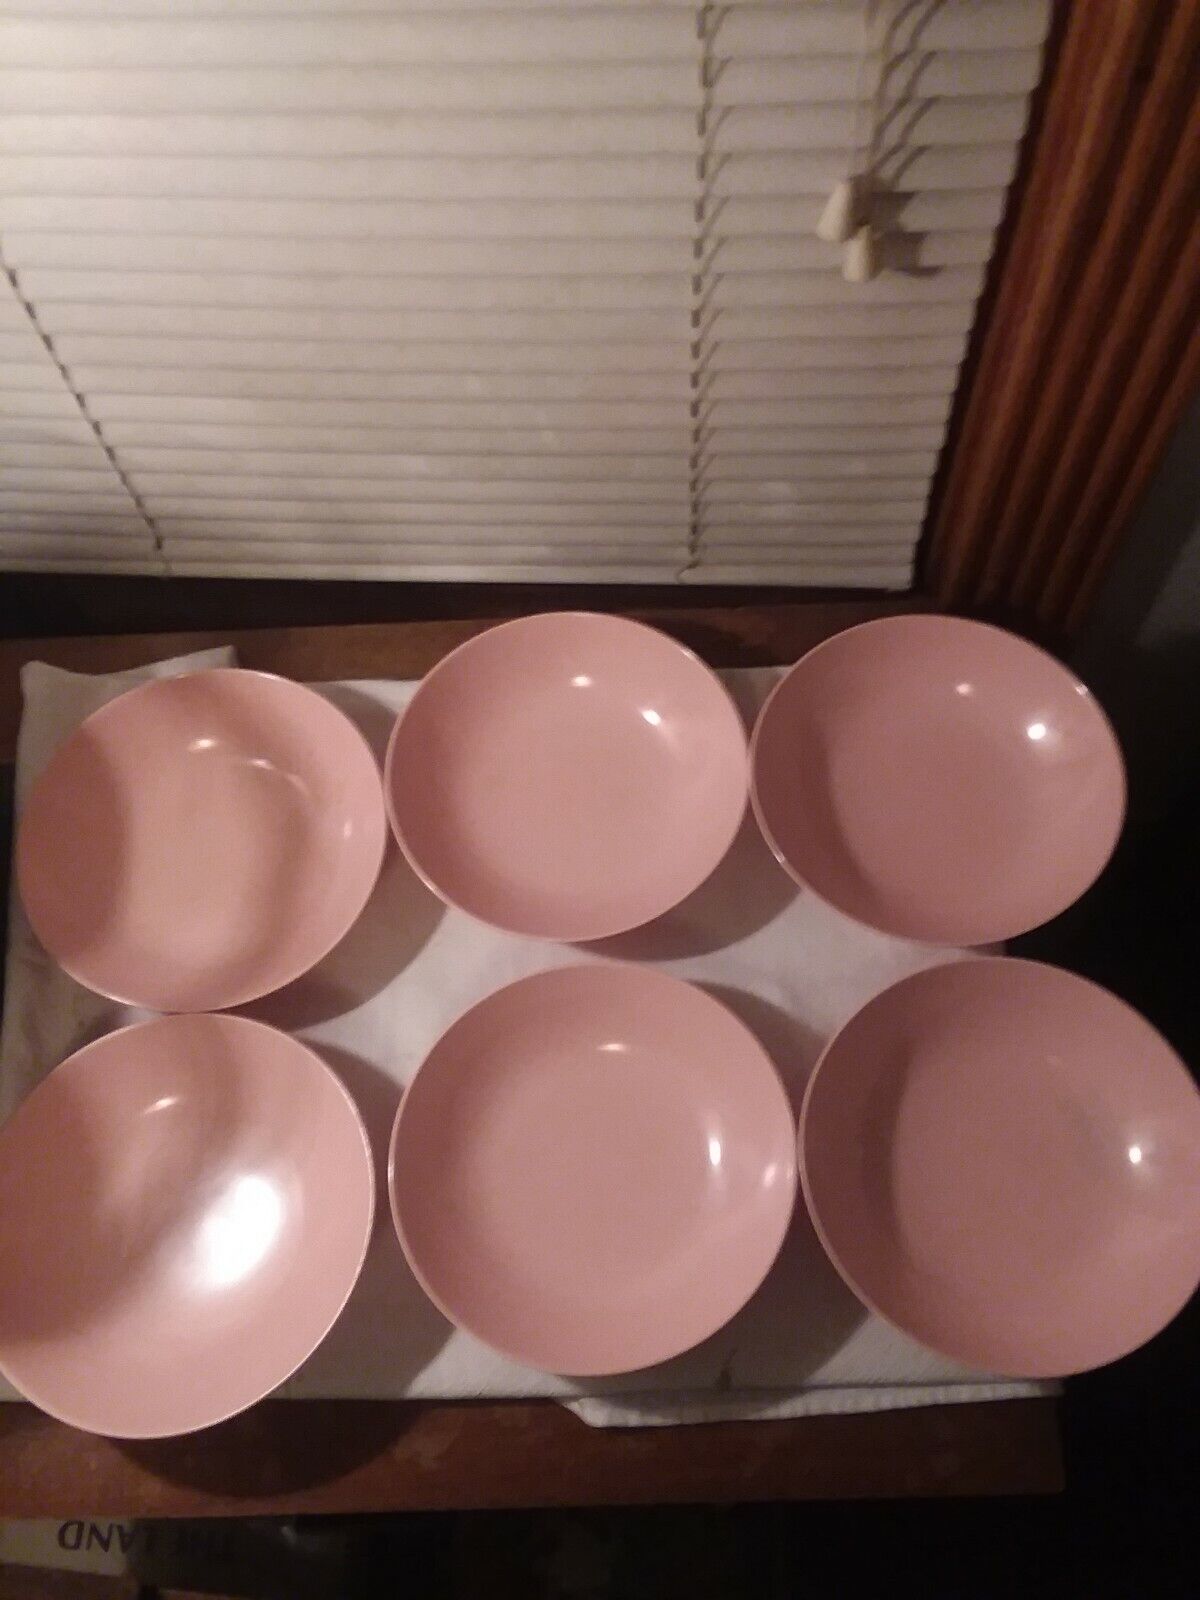 Vintage 7 Inch Plastic Bowls with no name on them 